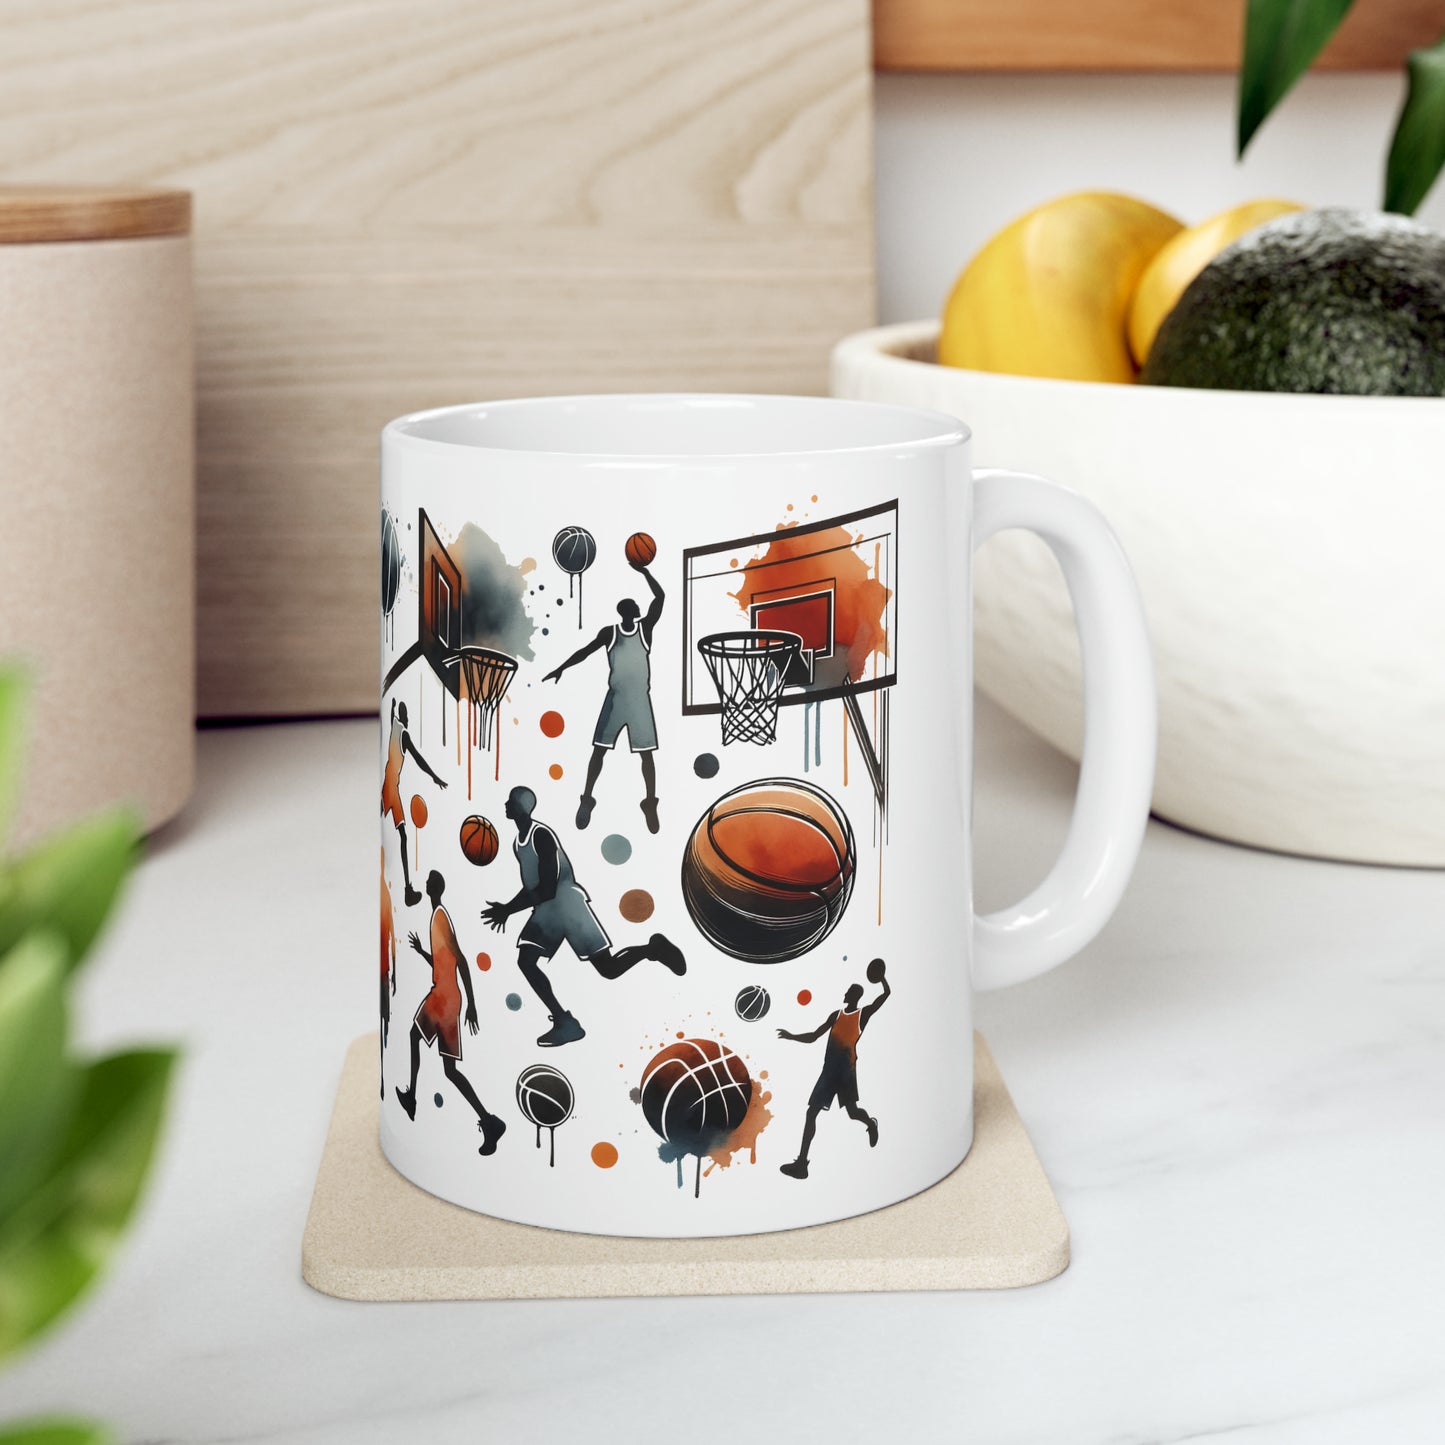 White ceramic mug (11oz) featuring vibrant basketball-themed artwork, perfect for sports enthusiasts. BPA and lead-free, microwave and dishwasher safe